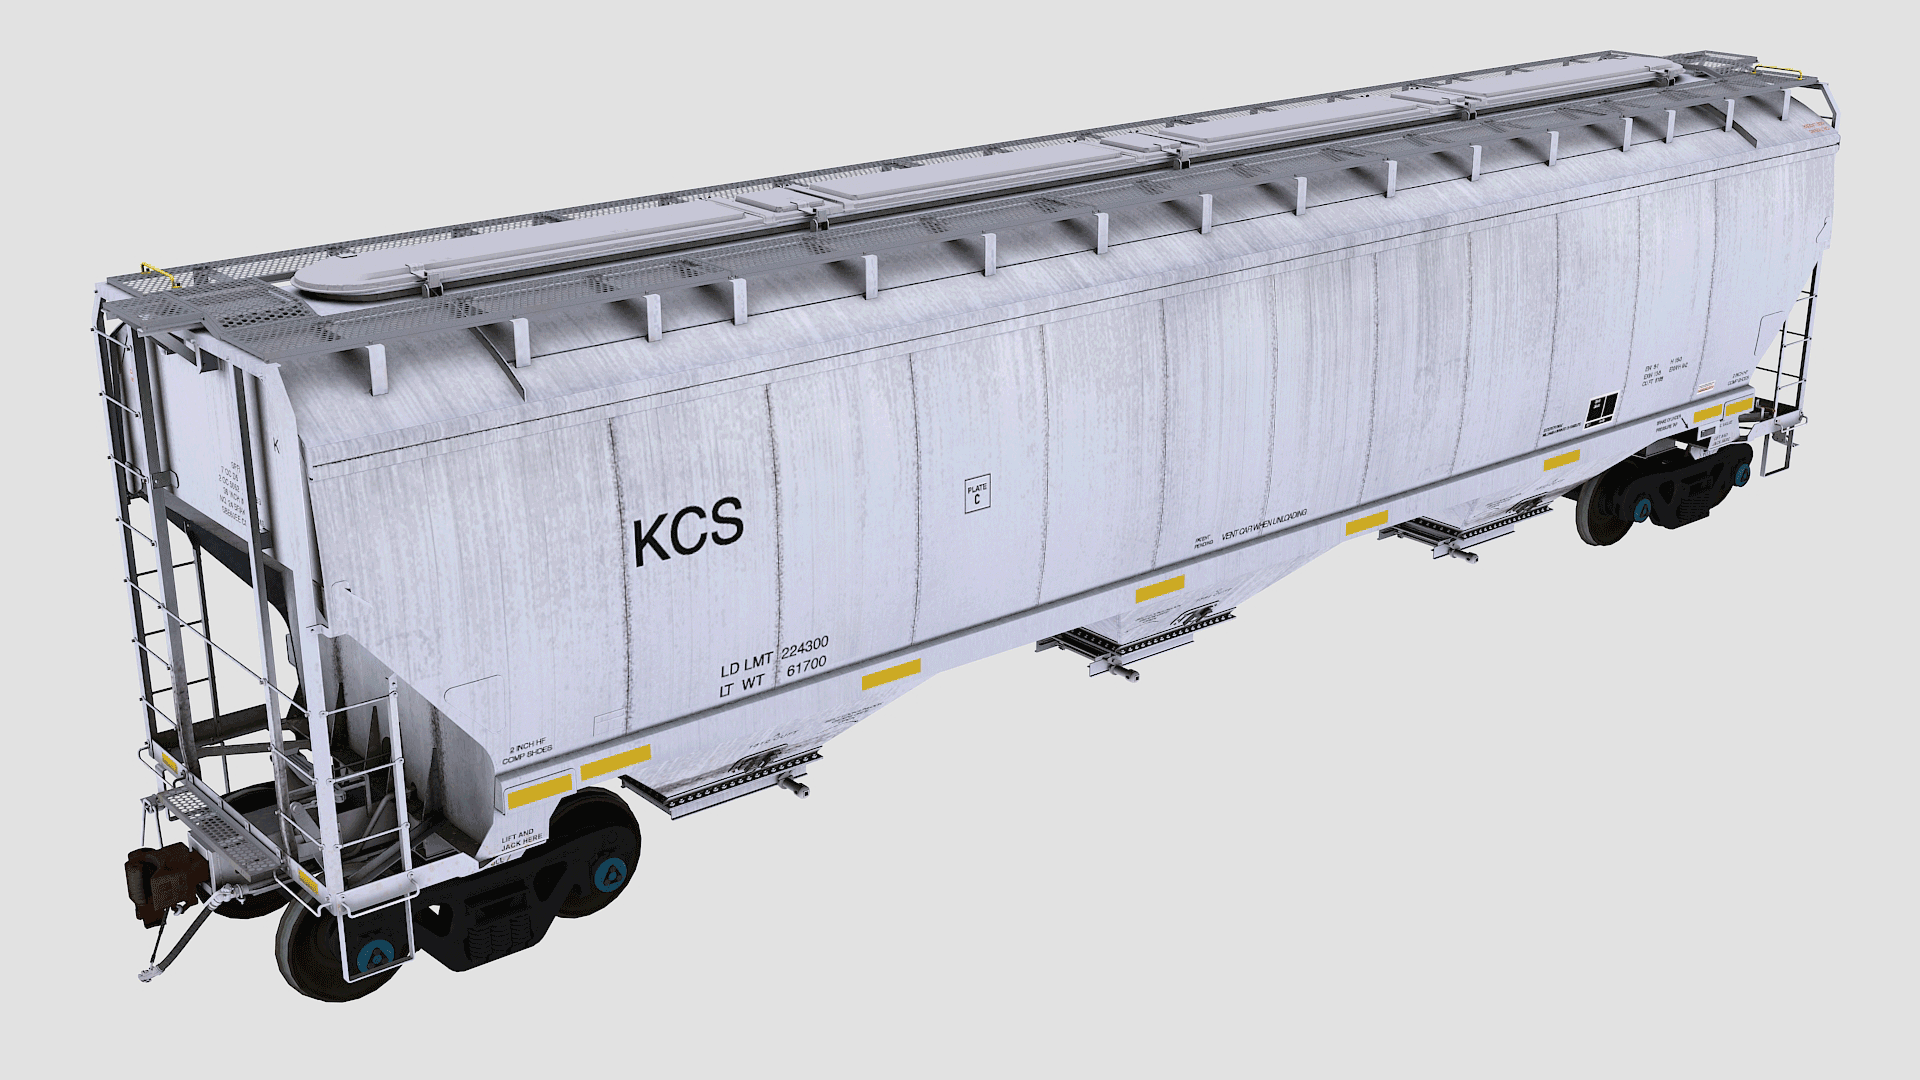 The kcs Greenbrier three bay covered hopper